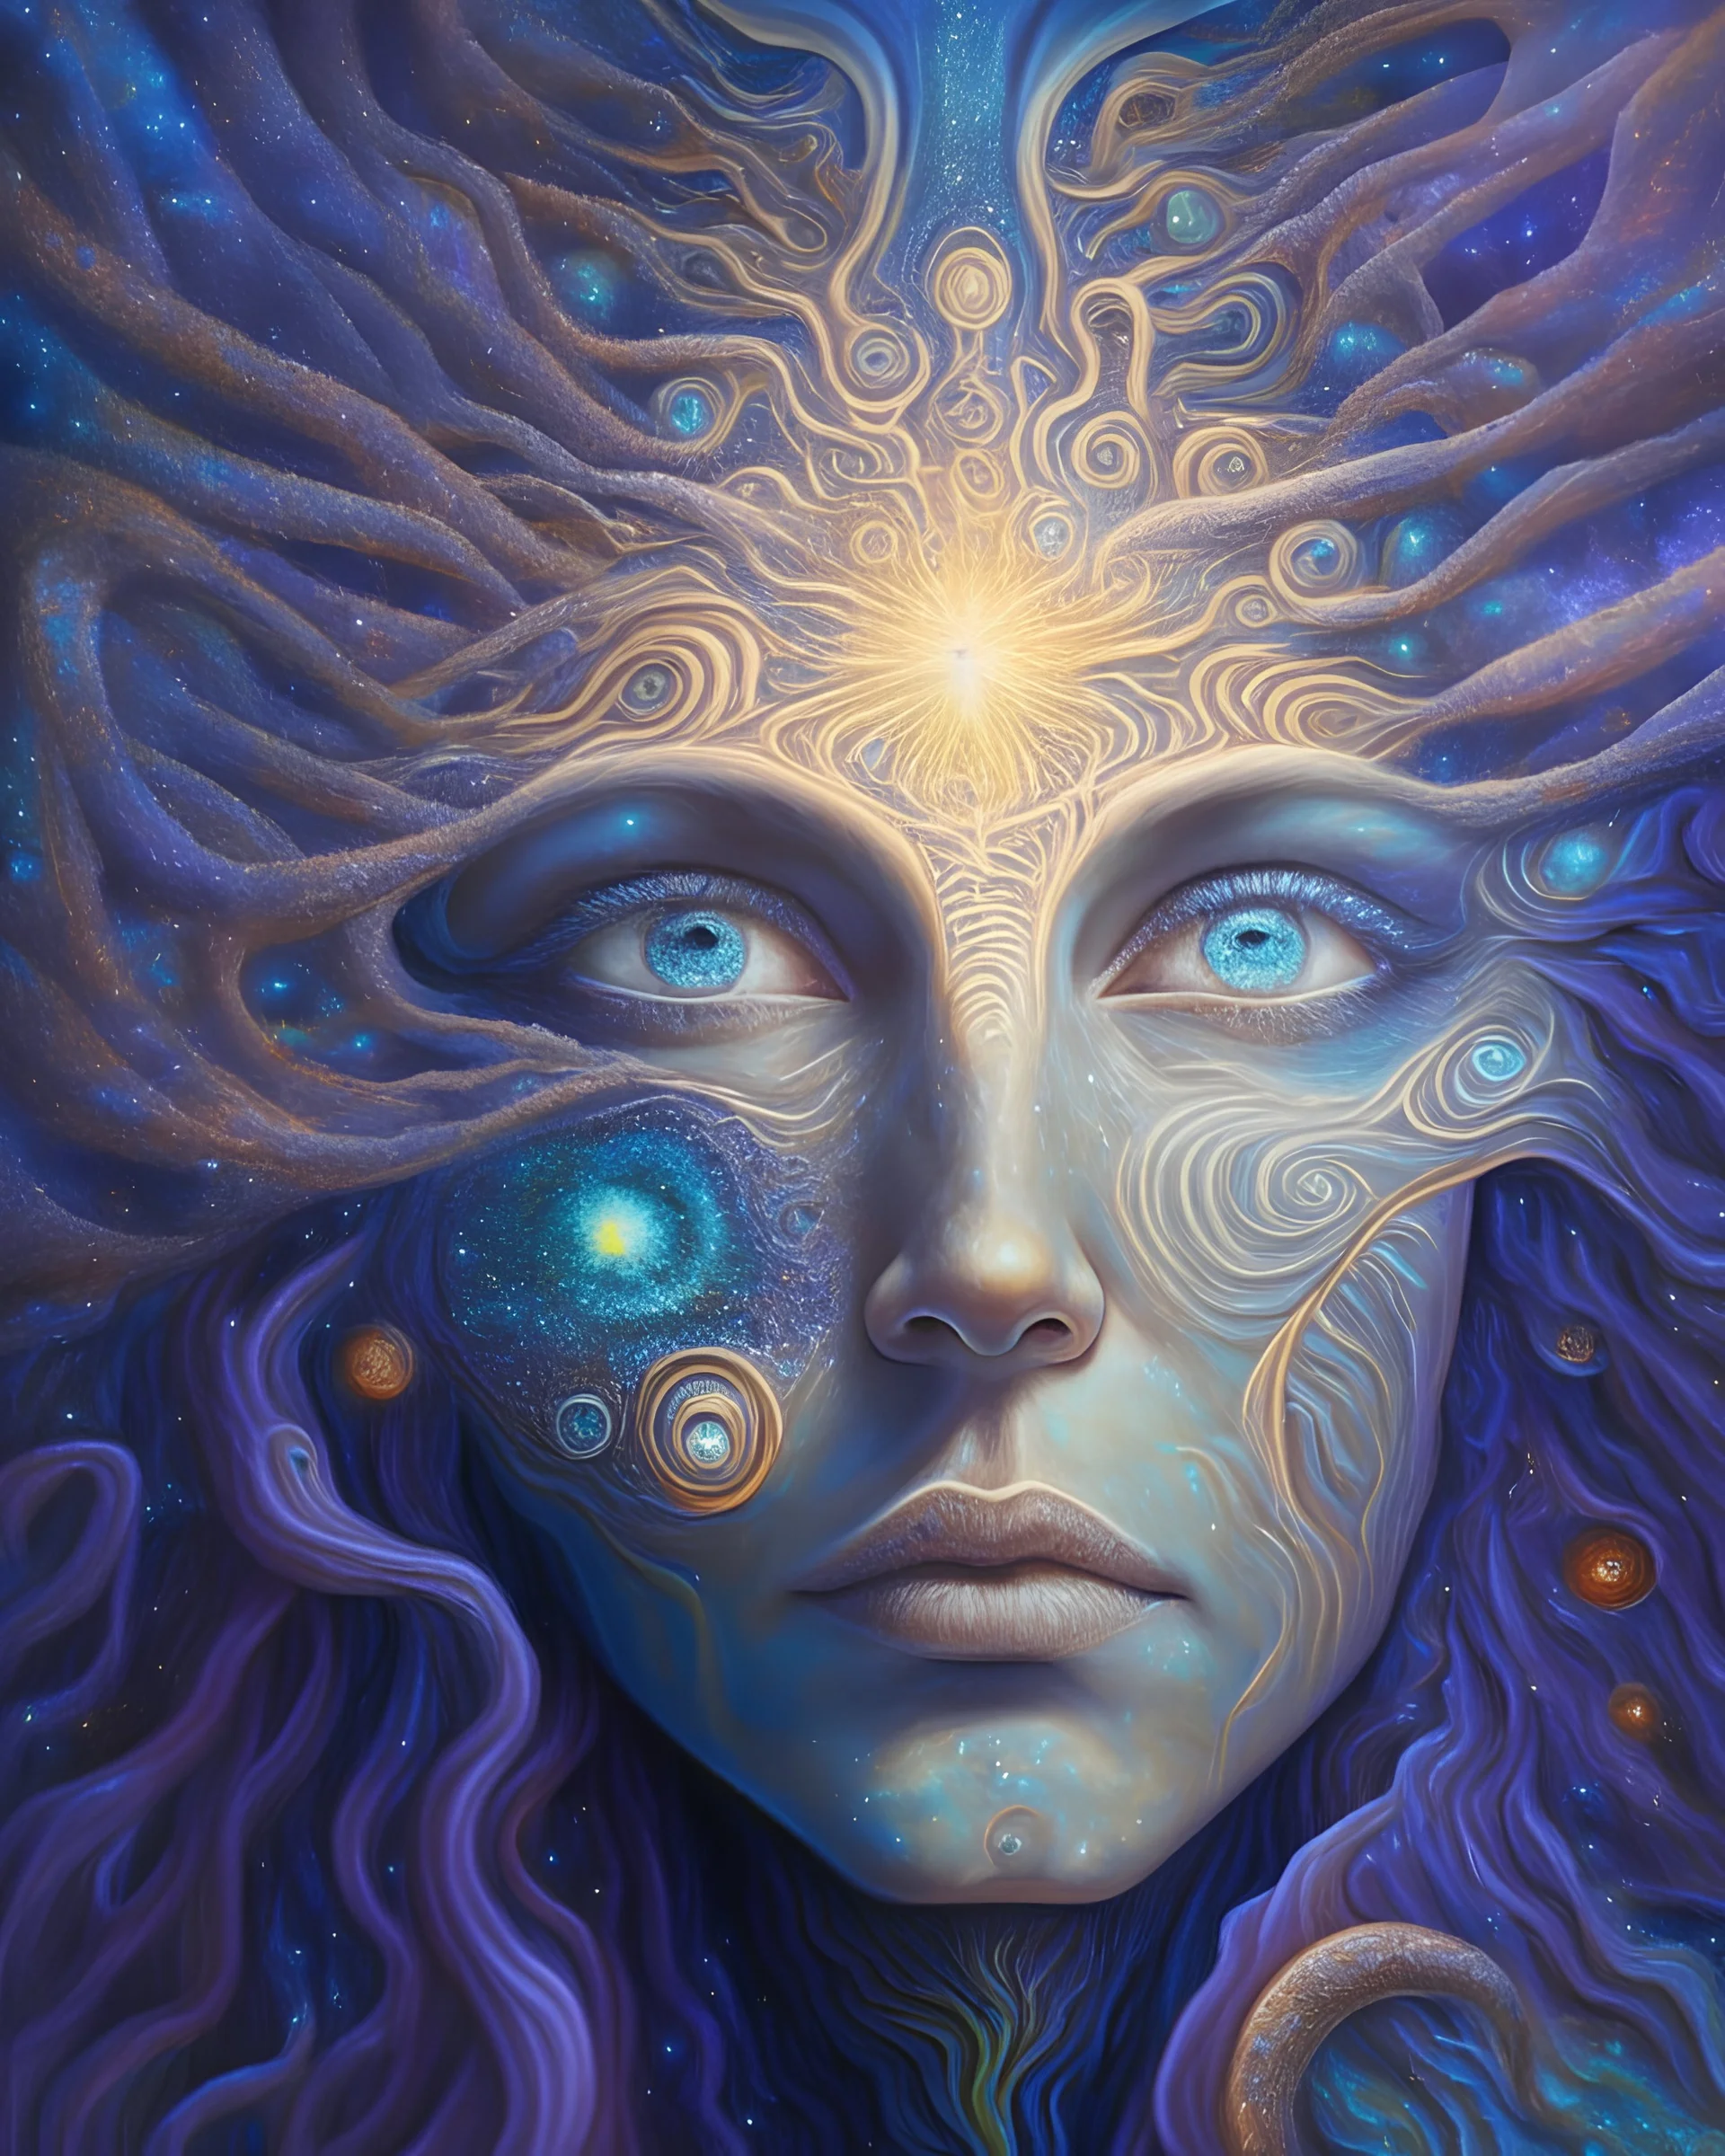 A mesmerizing portrait of a celestial being, with eyes that hold galaxies within them and hair that flows like cosmic stardust, in the style of visionary art, iridescent colors, dreamy textures, and otherworldly aura, influenced by the works of Alex Grey and Android Jones, inviting the viewer to contemplate the mysteries of the universe.